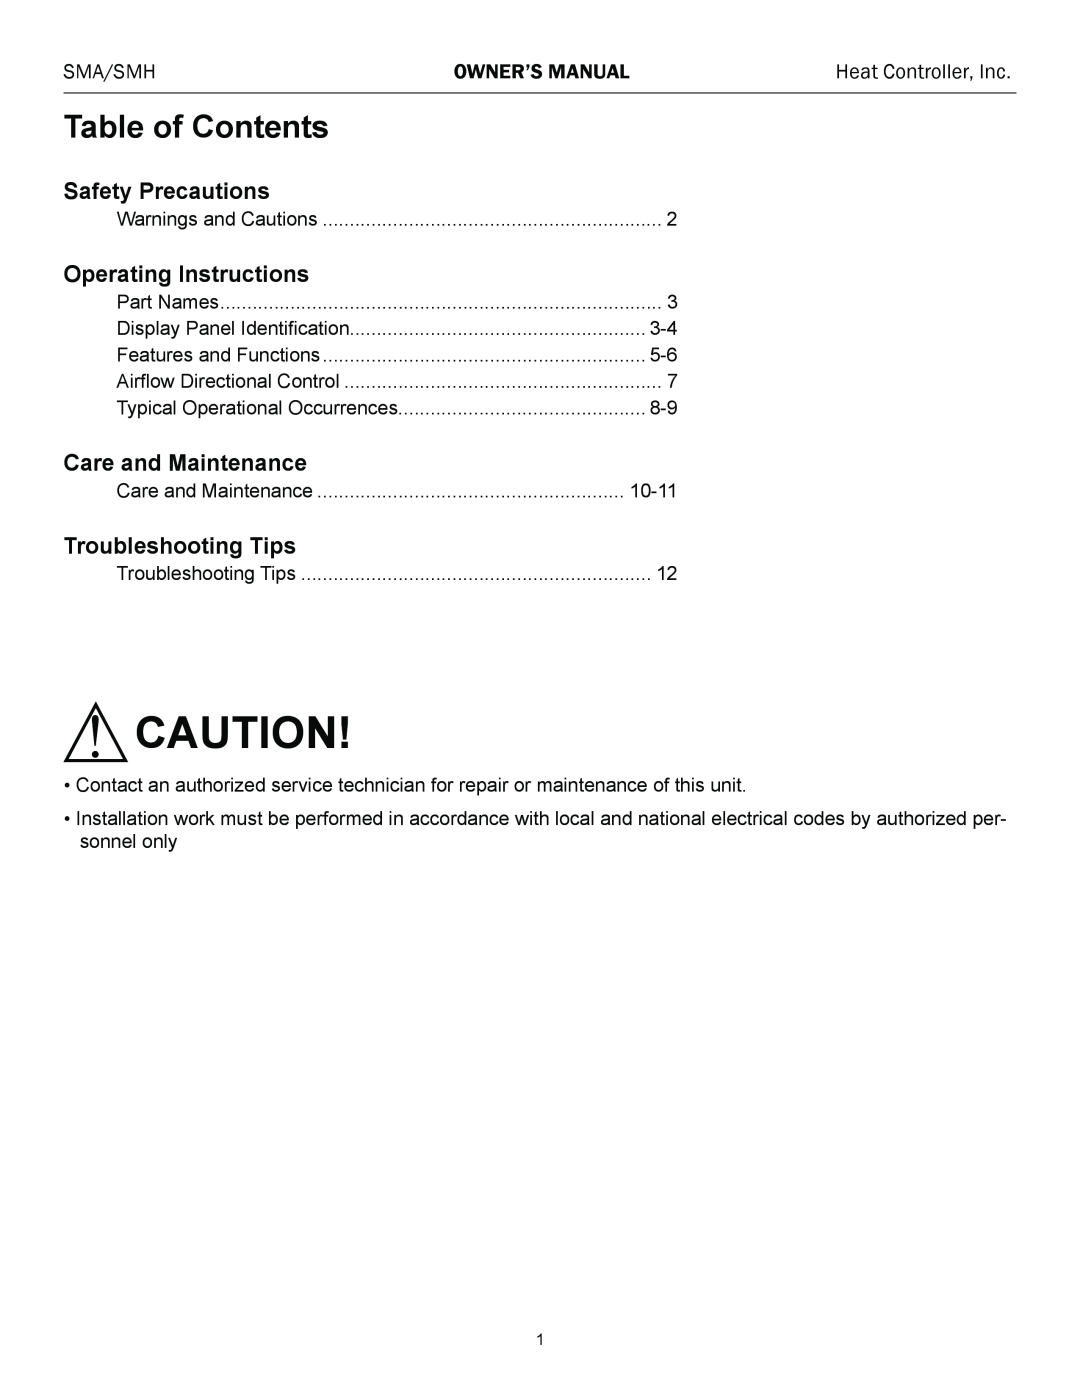 Heat Controller SMA/SMH 09 Table of Contents, Safety Precautions, Operating Instructions, Care and Maintenance, Sma/Smh 